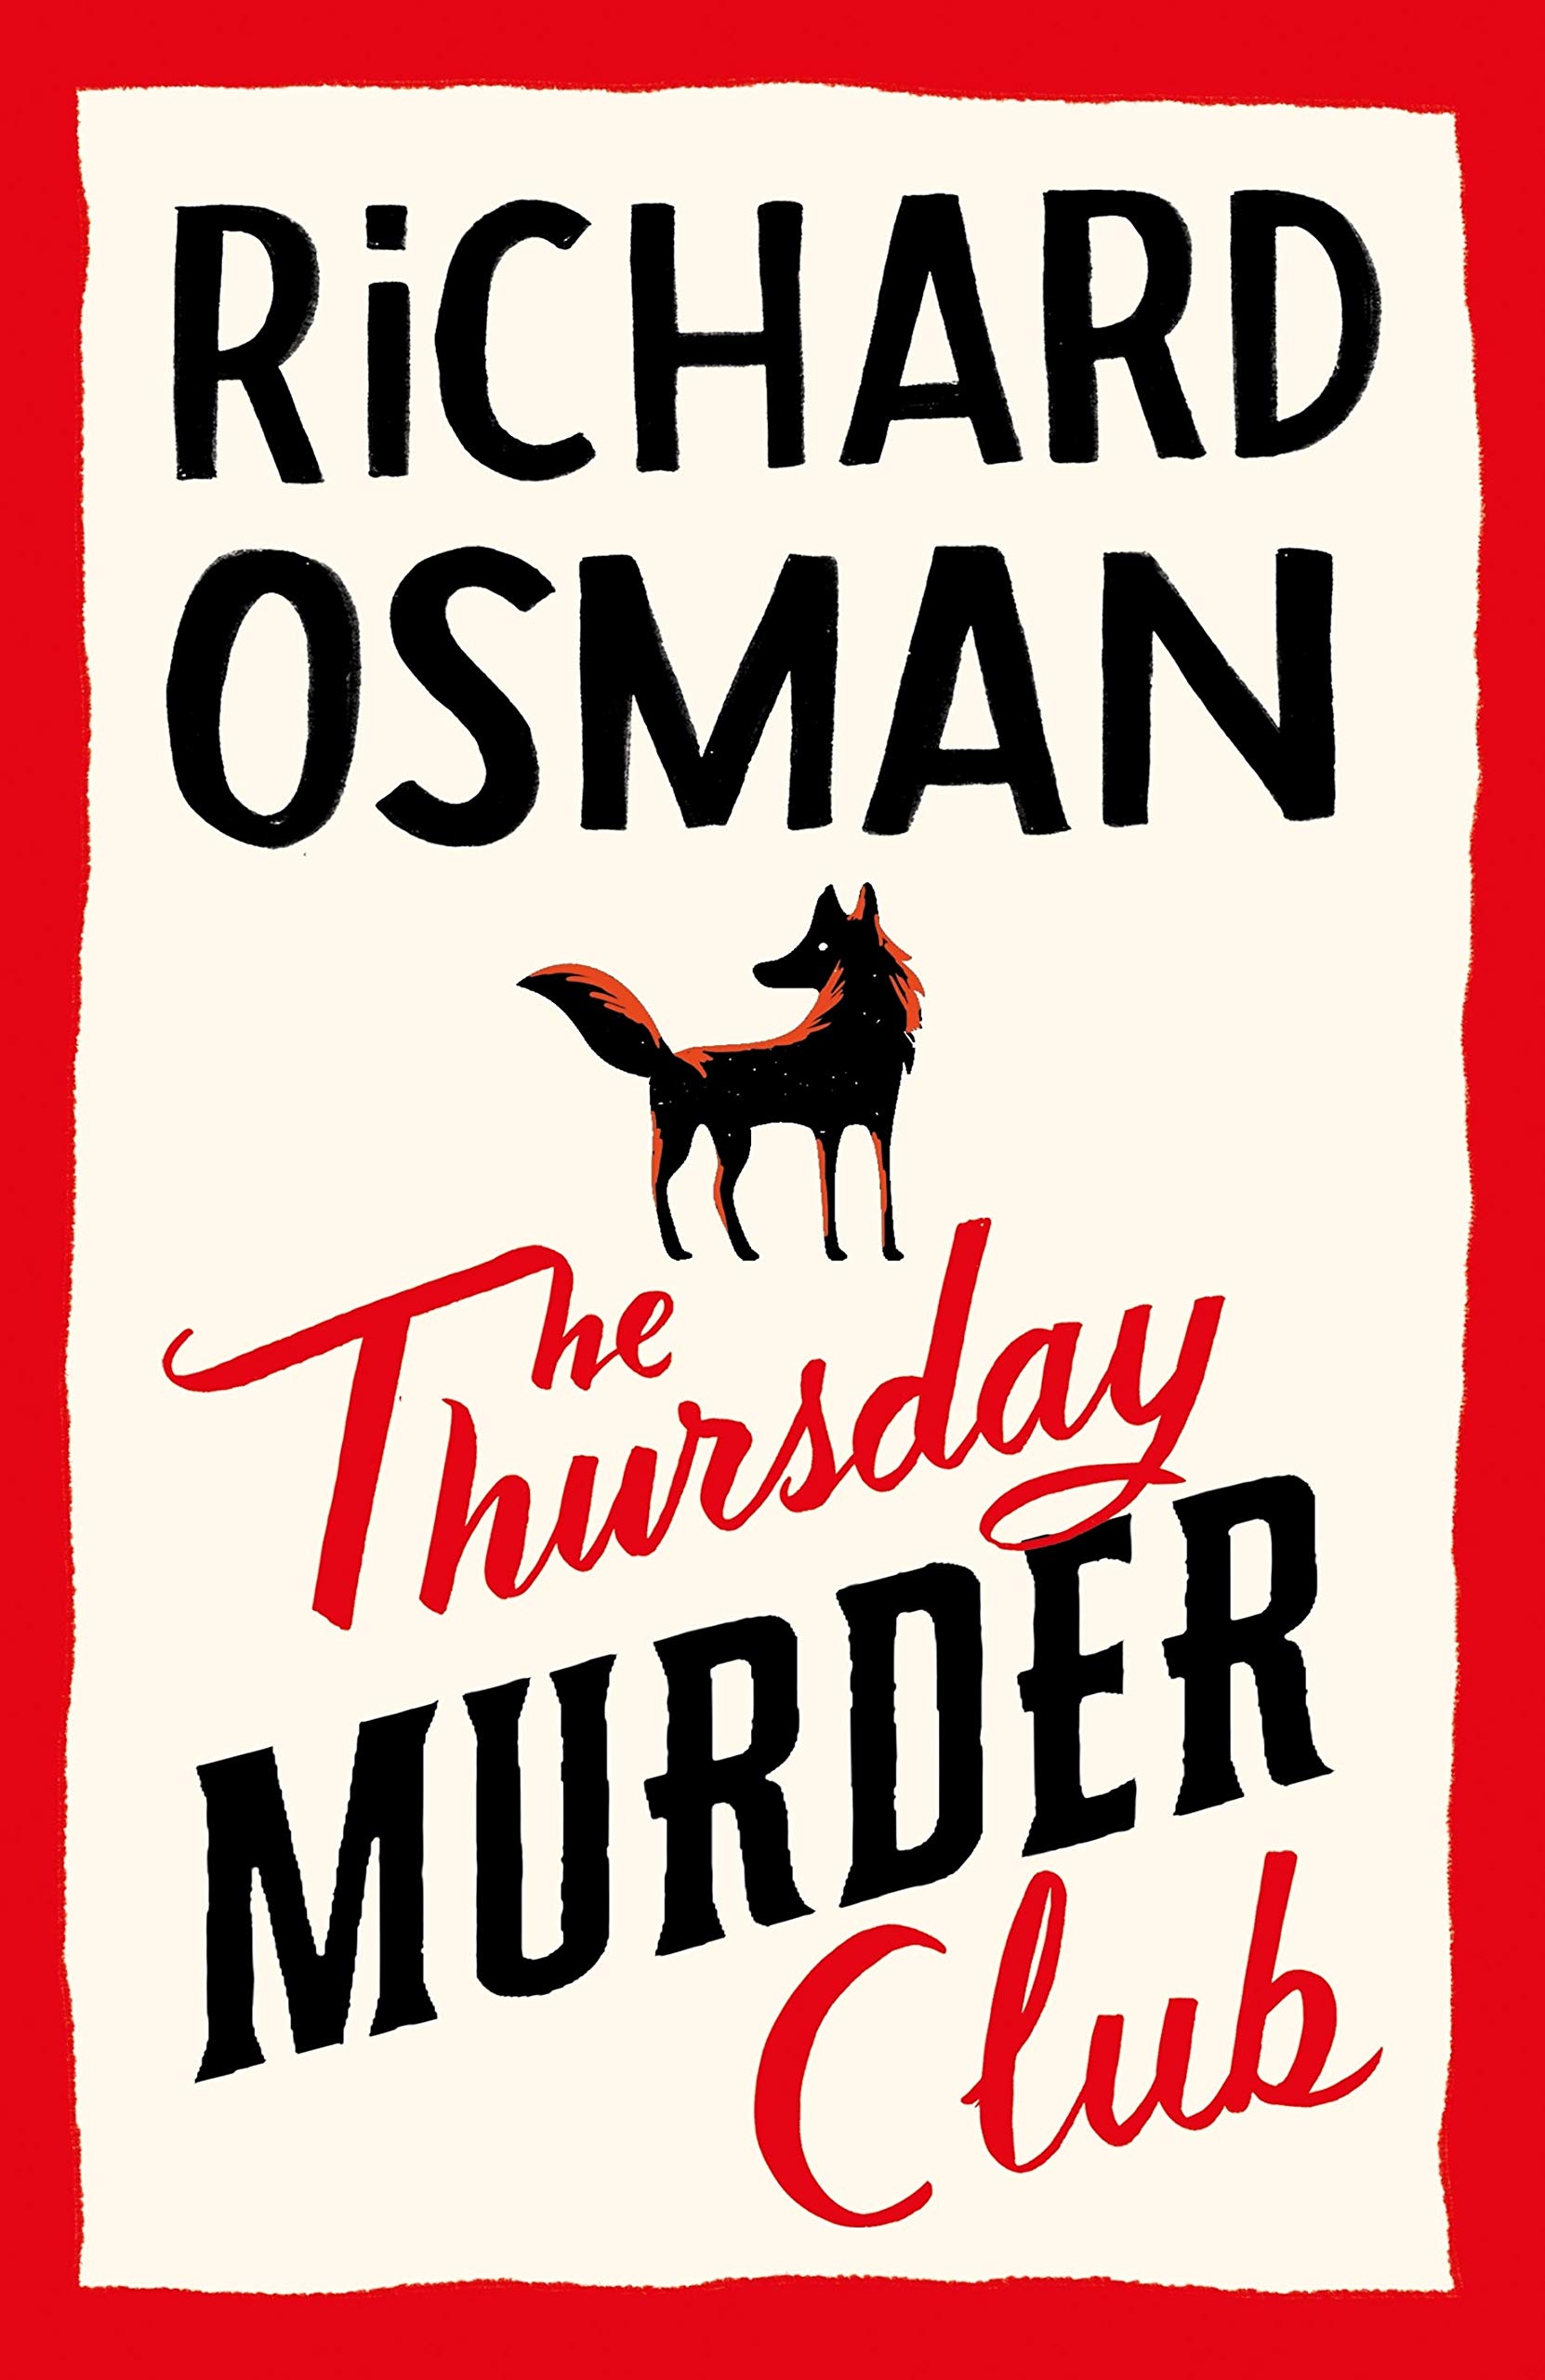 The Thursday Murder Club book recommendation